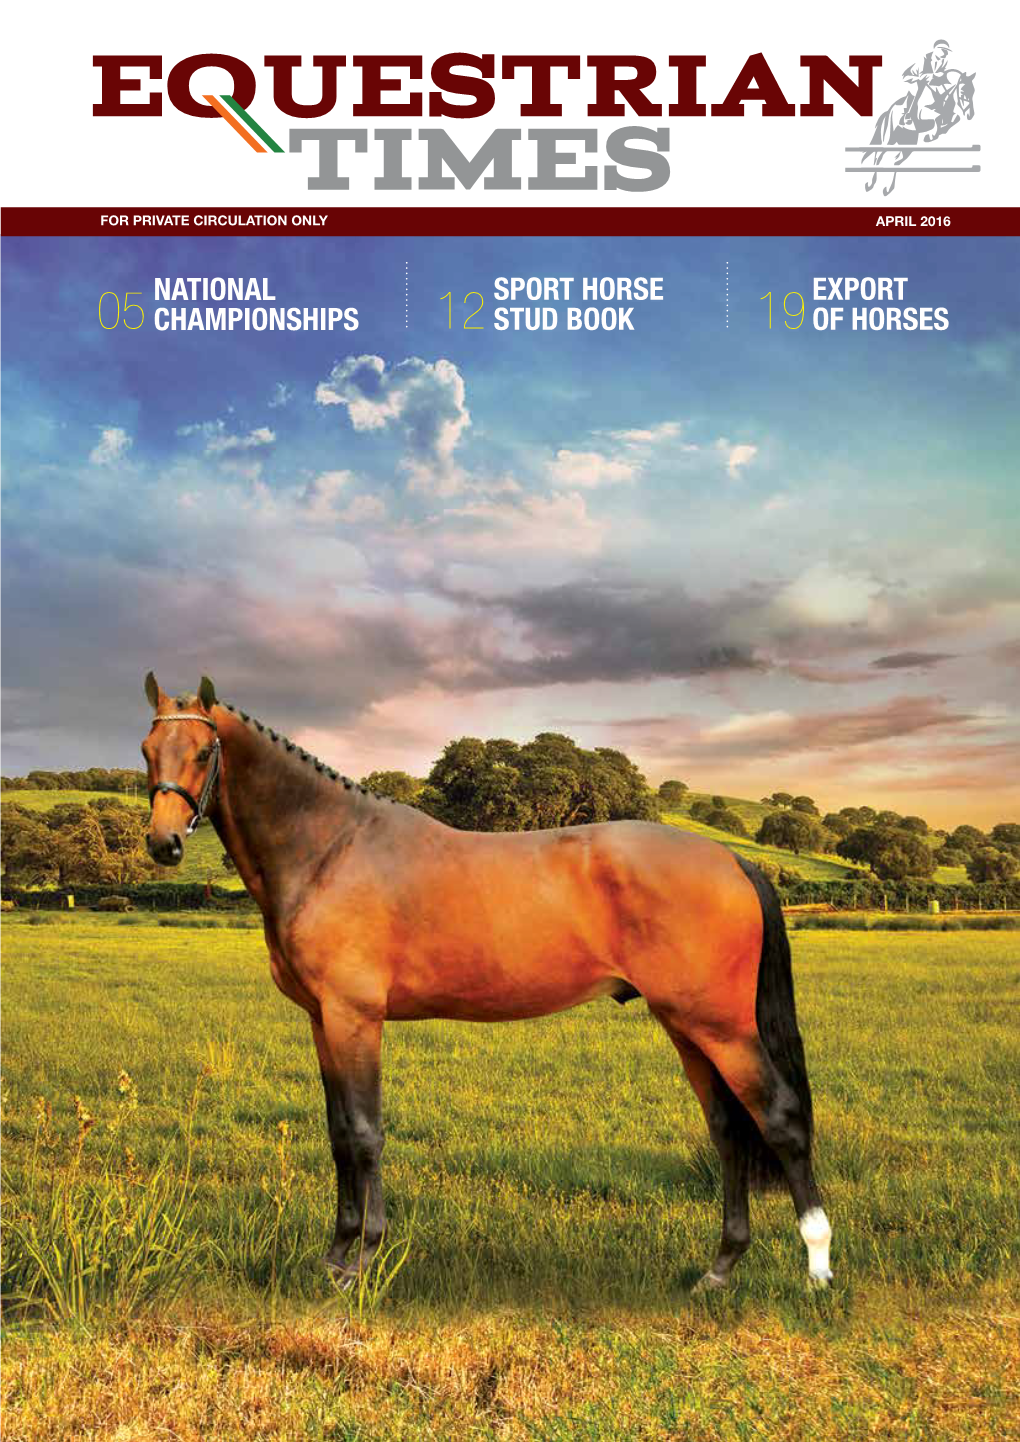 National Championships Sport Horse Stud Book Export Of